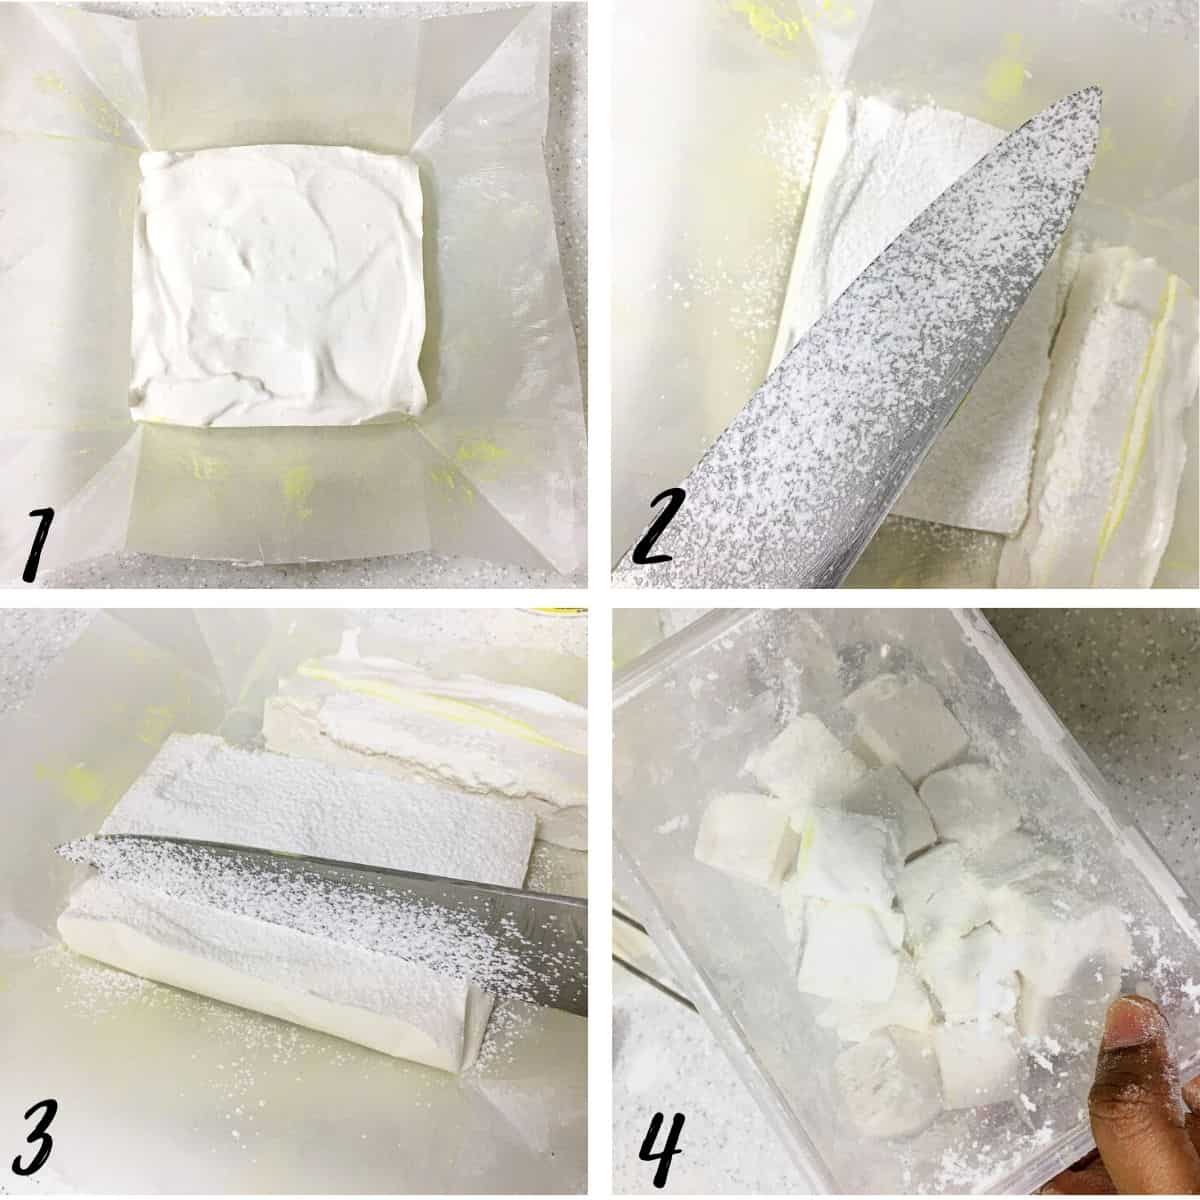 A poster of 4 images showing how to dust a knife, cut a block of marshmallow and toss the cut marshmallows into icing sugar dusting